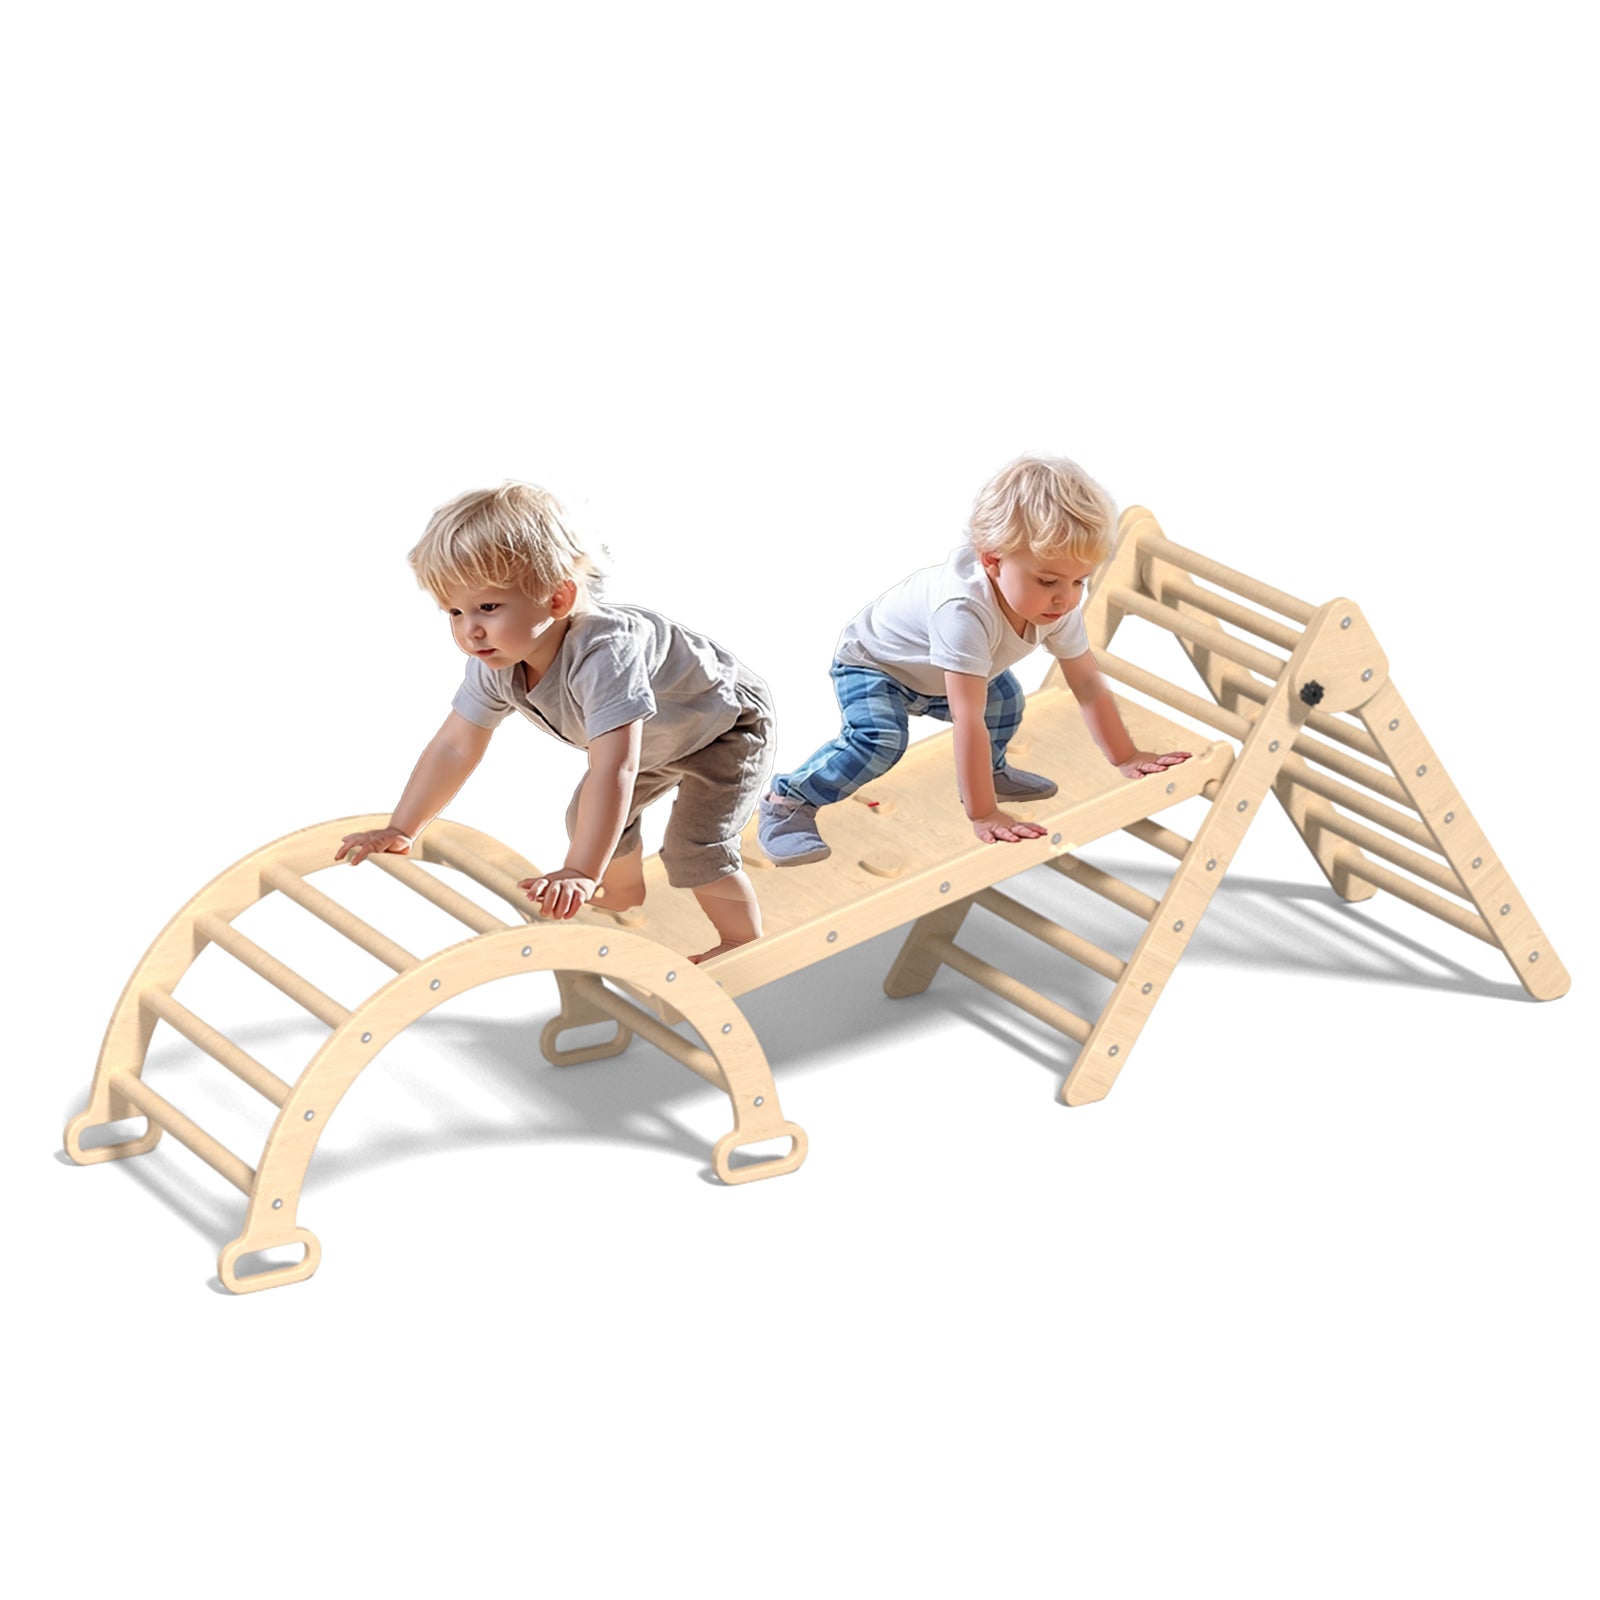 XJD 7 in 1 Wood Climber Play Set Primary Color In Stock USA